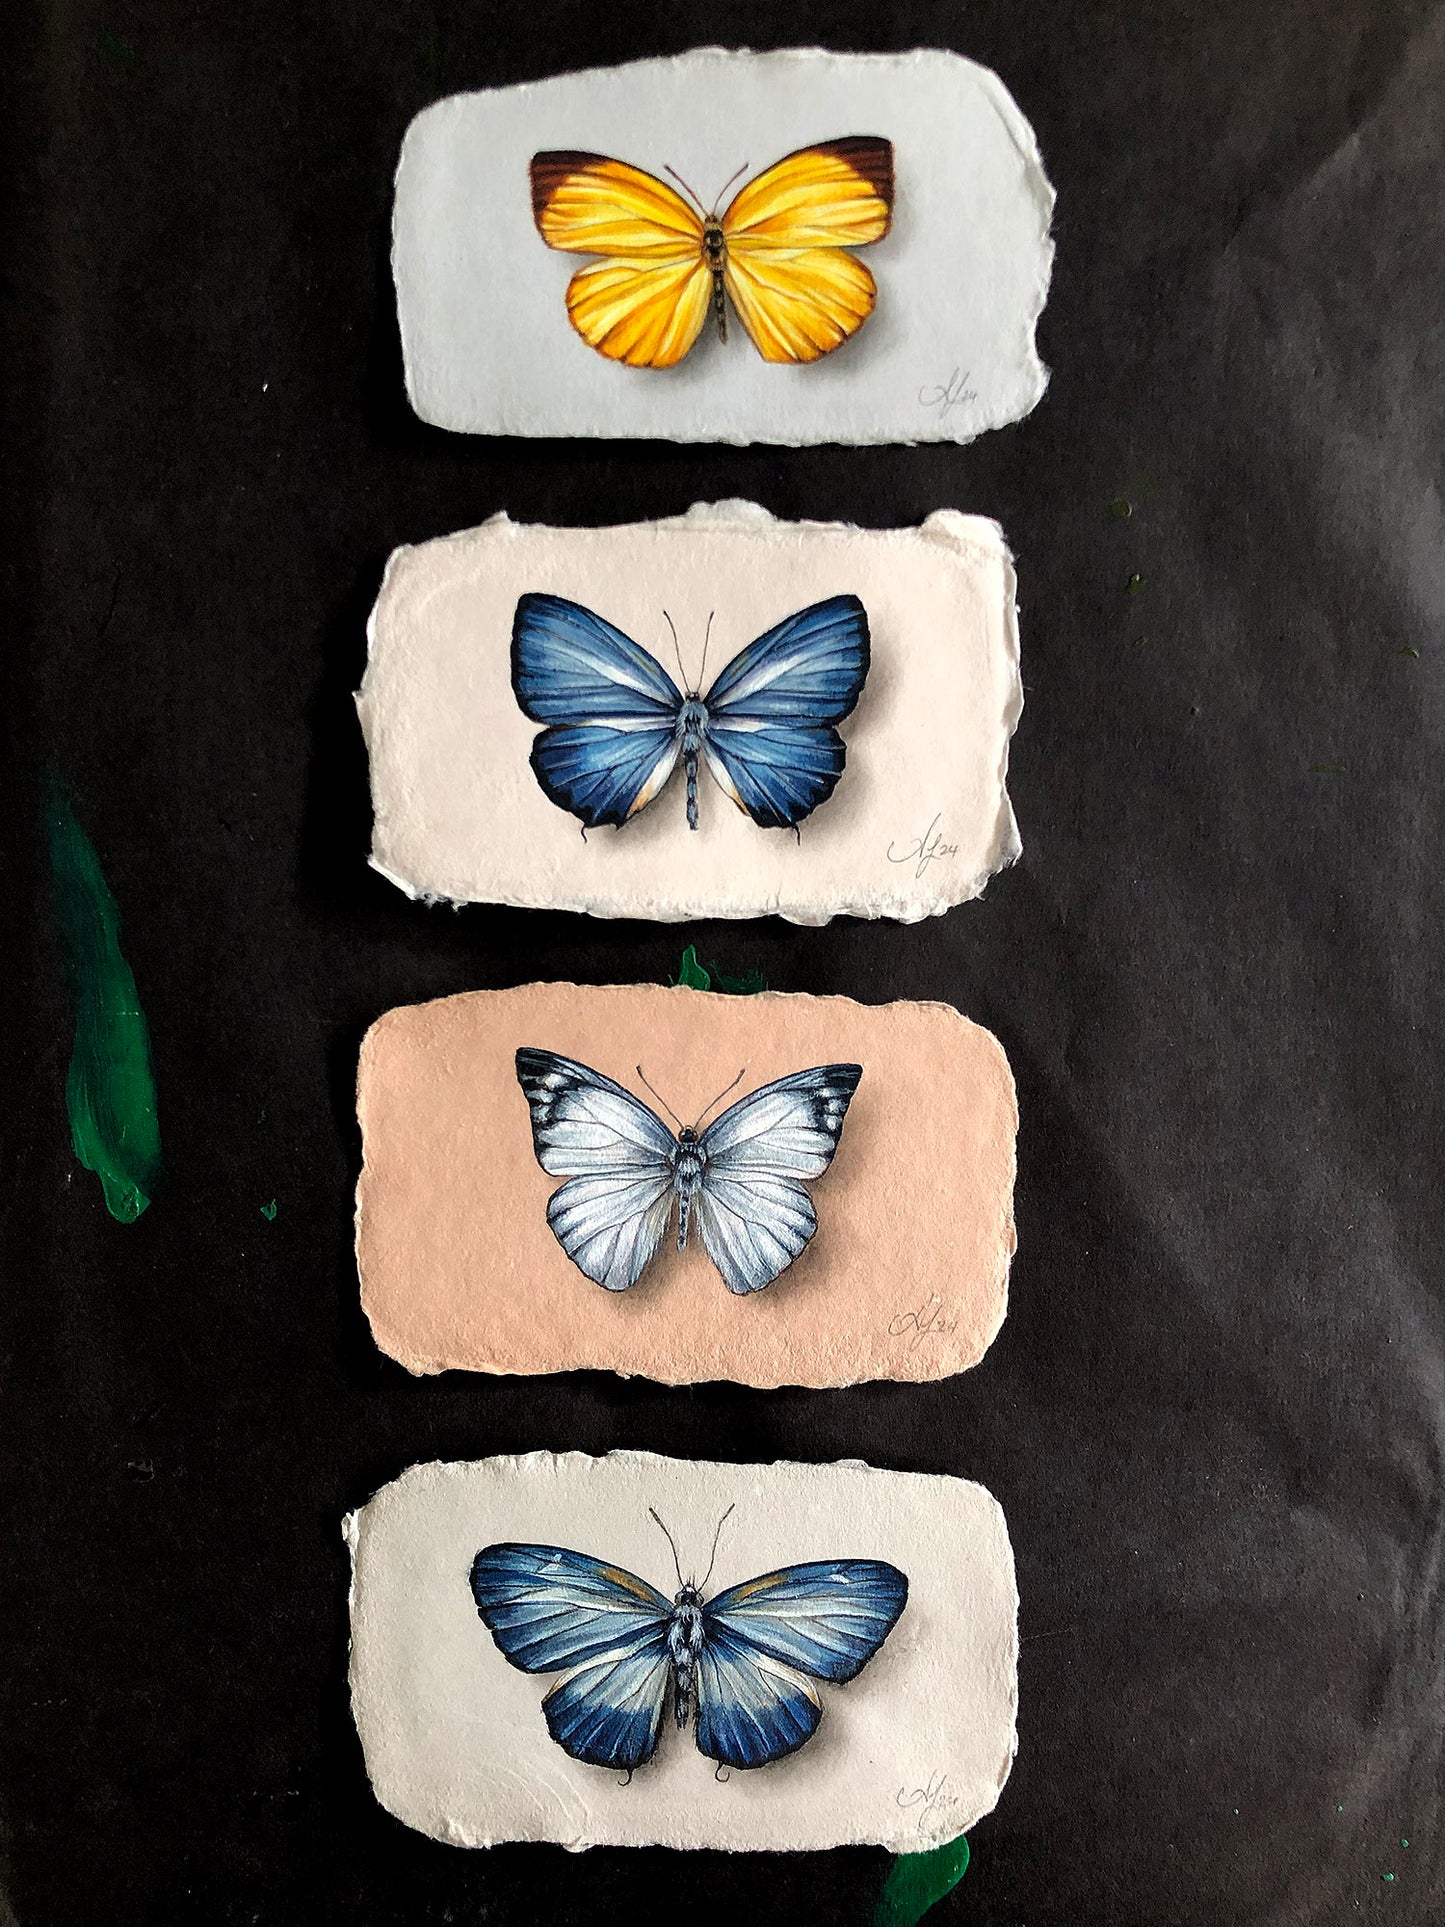 Butterfly on Handmade Paper #7 - 4.5 x 2.5"